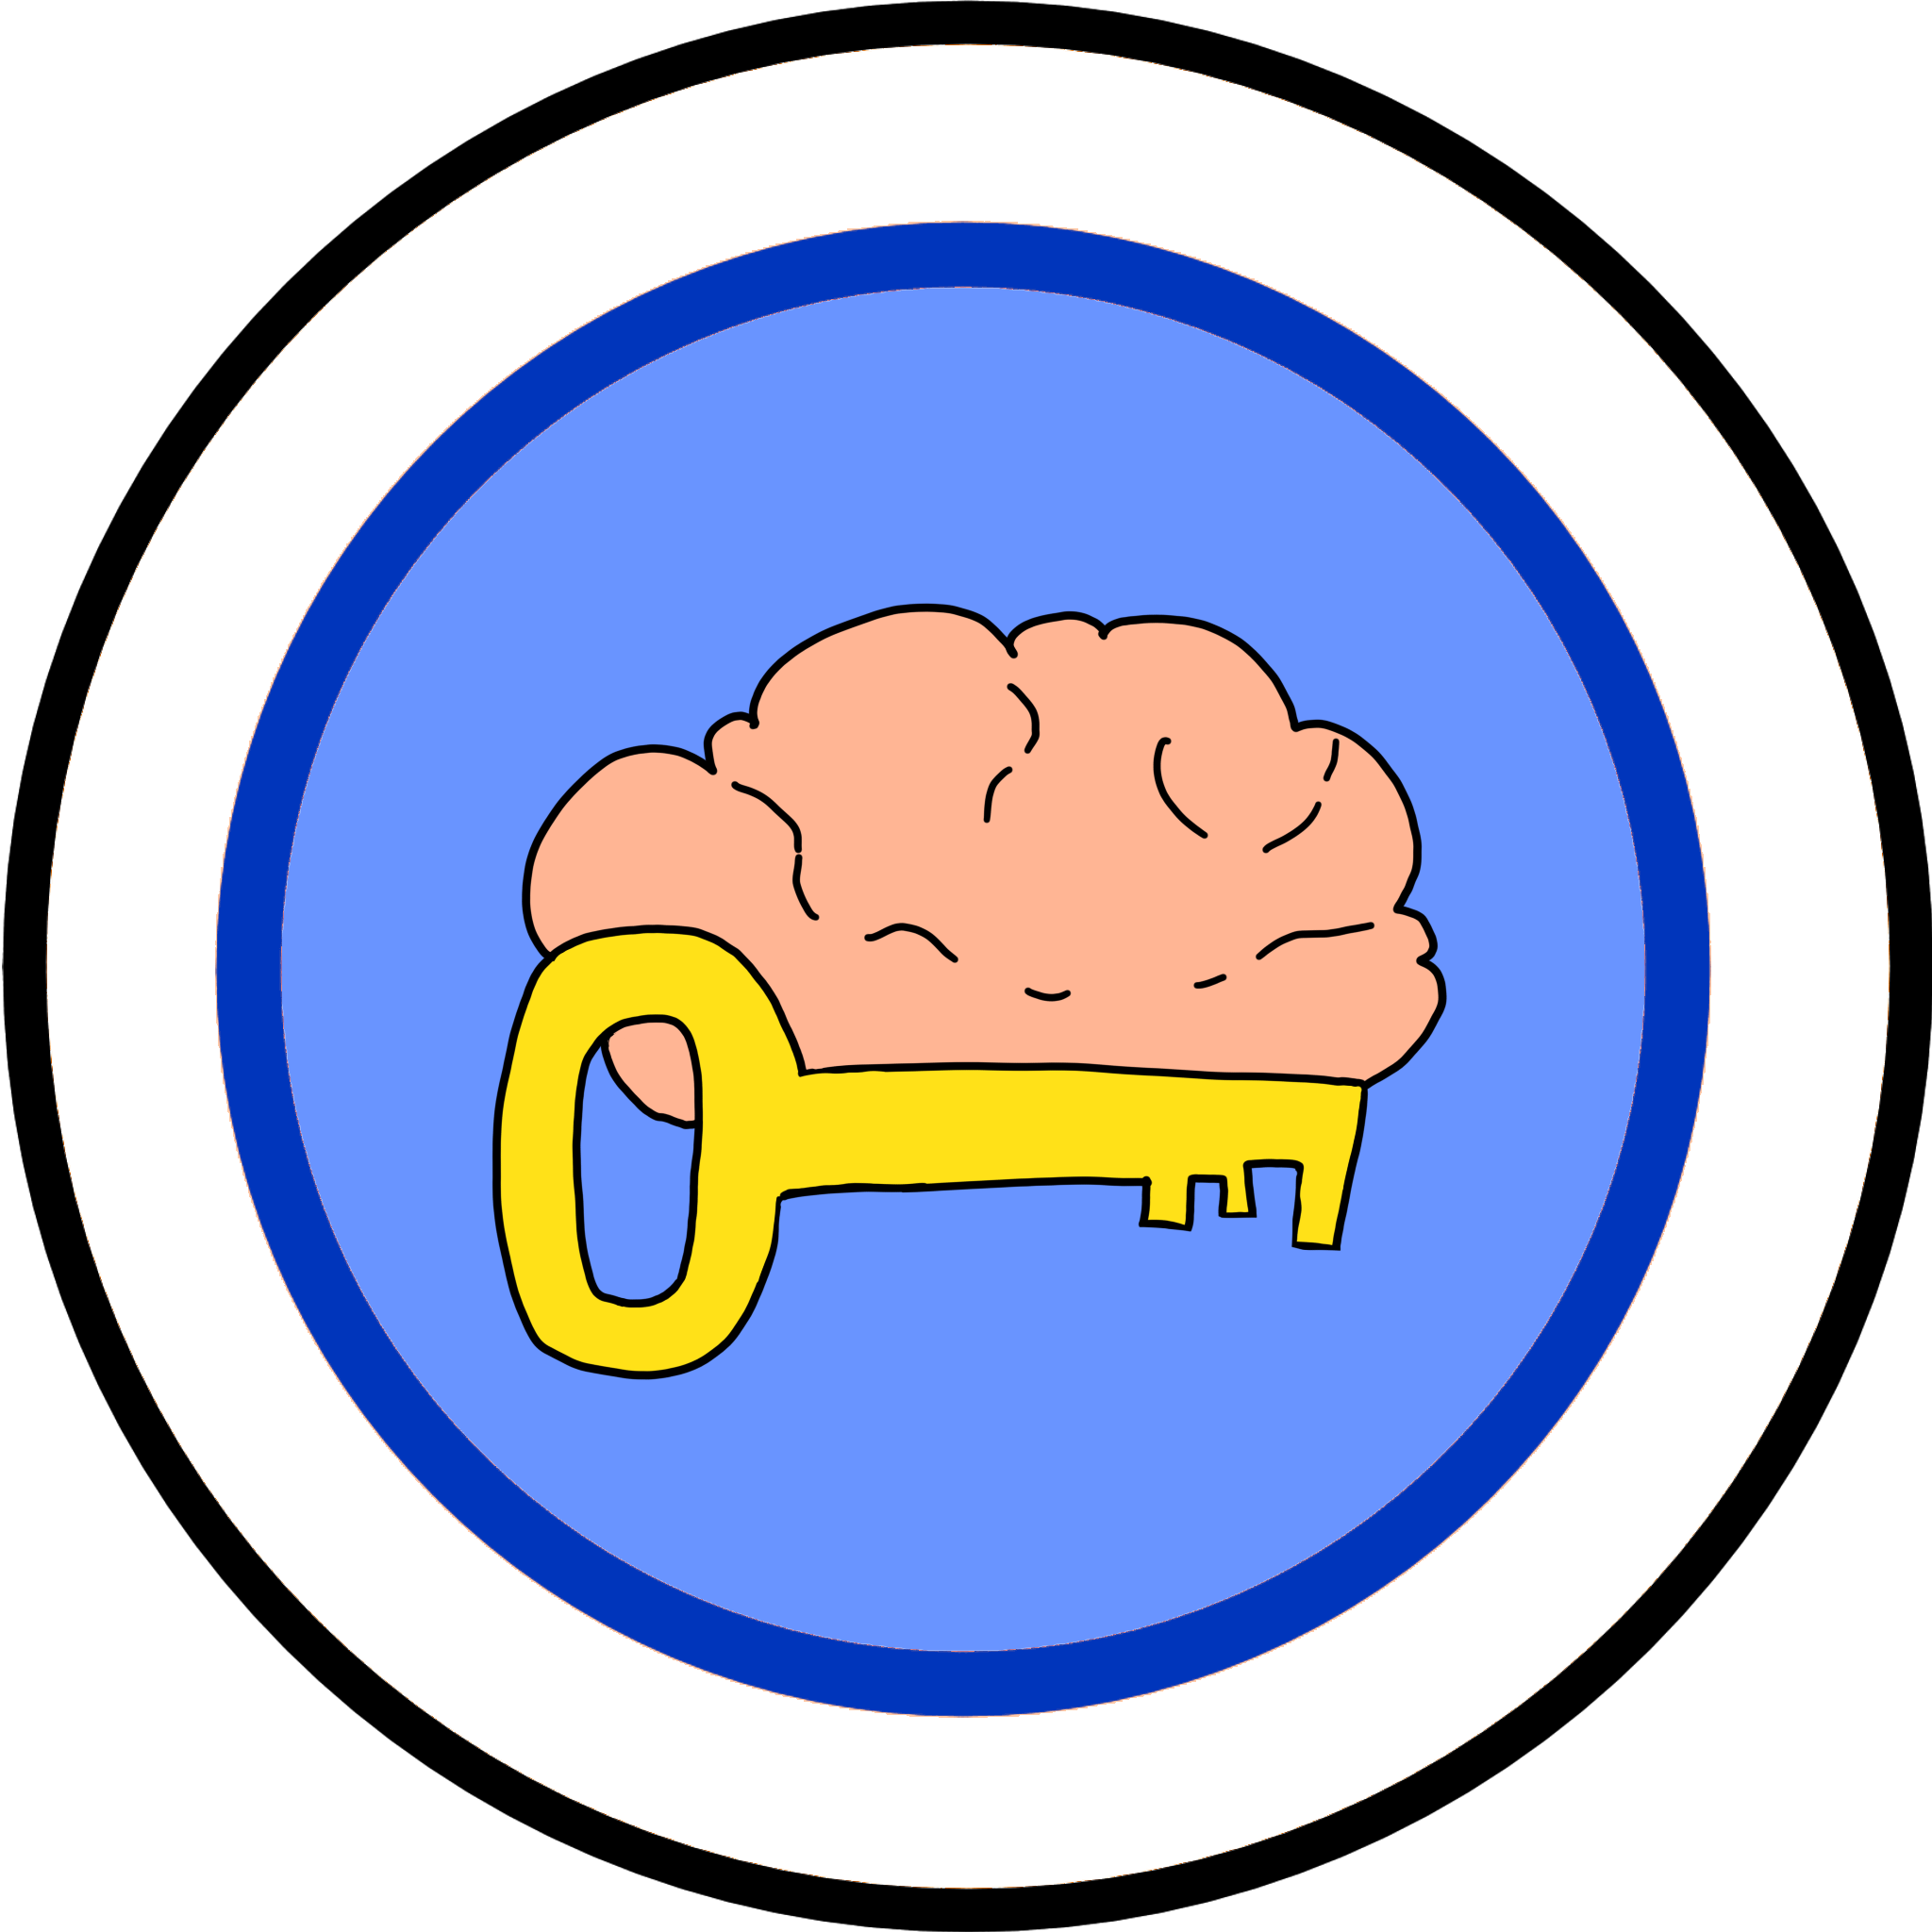 A small logo representing genius pass - consist of a key and a brain superimposed on top of each other